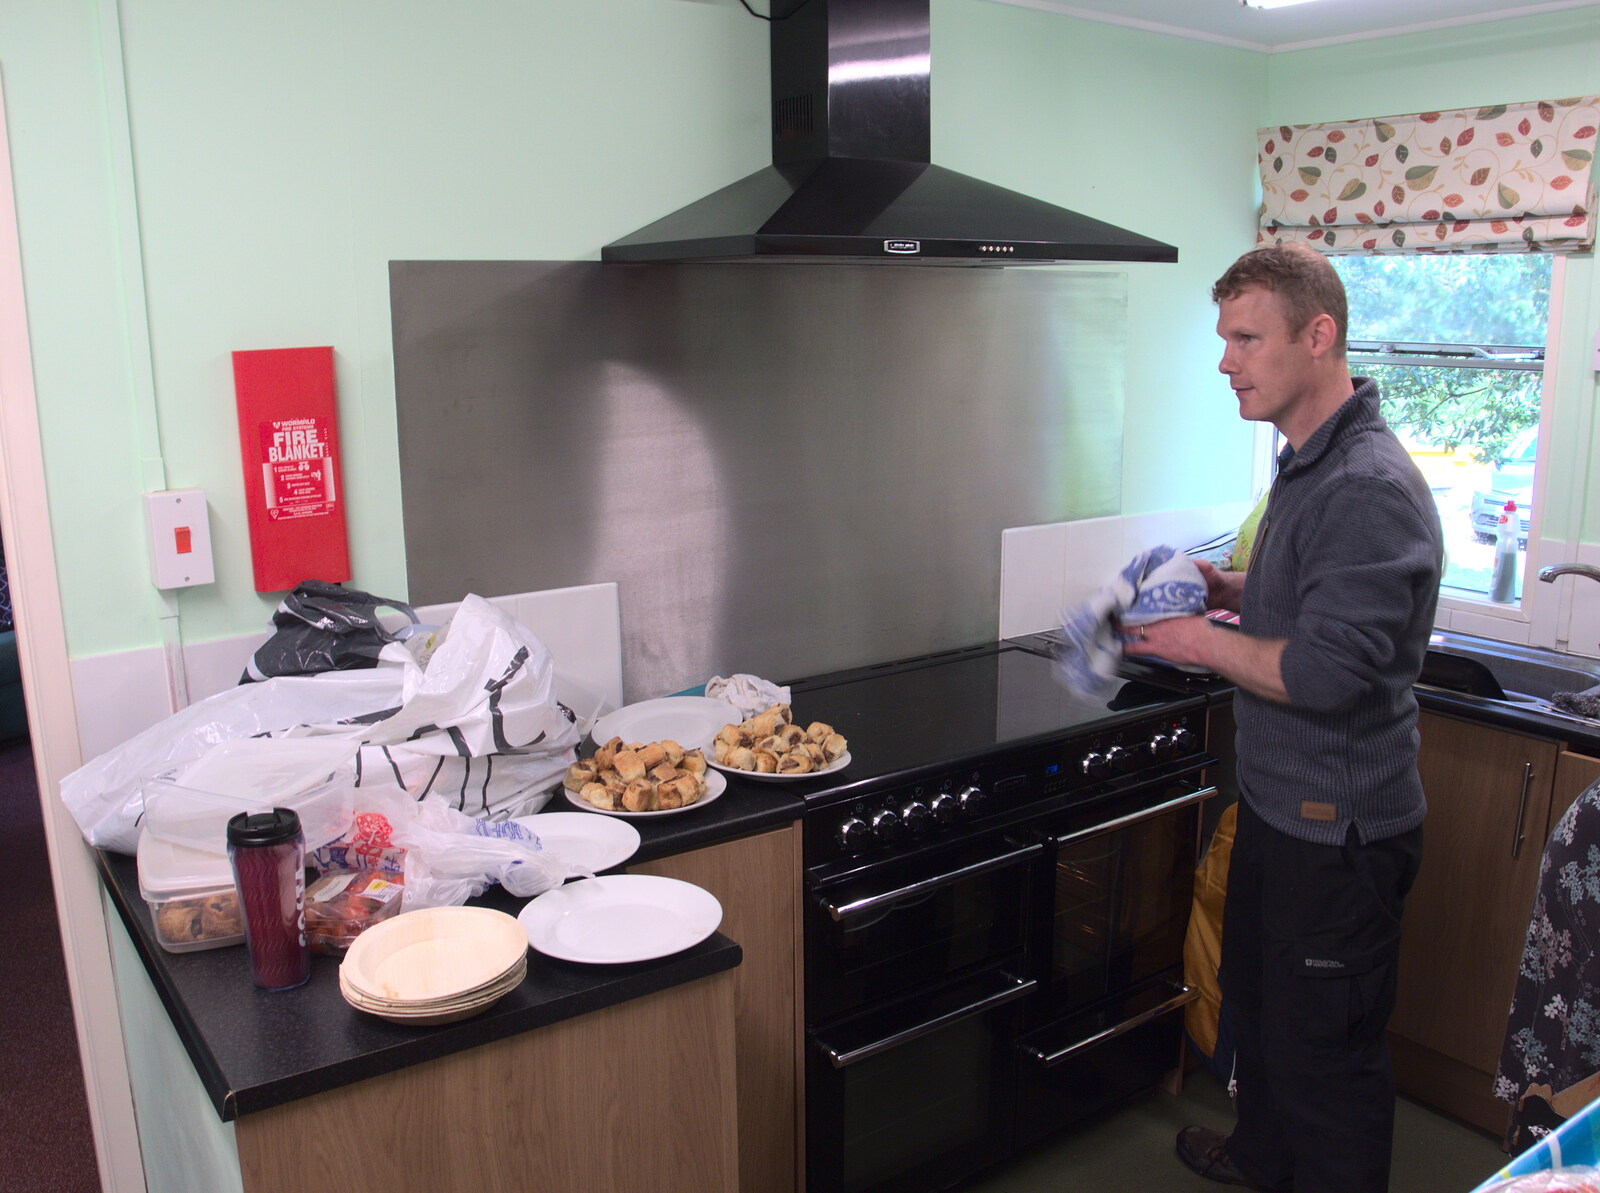 Mikey P sorts out sausage rolls in the kitchen from Making Dens: Rosie's Birthday, Thornham, Suffolk - 25th April 2015